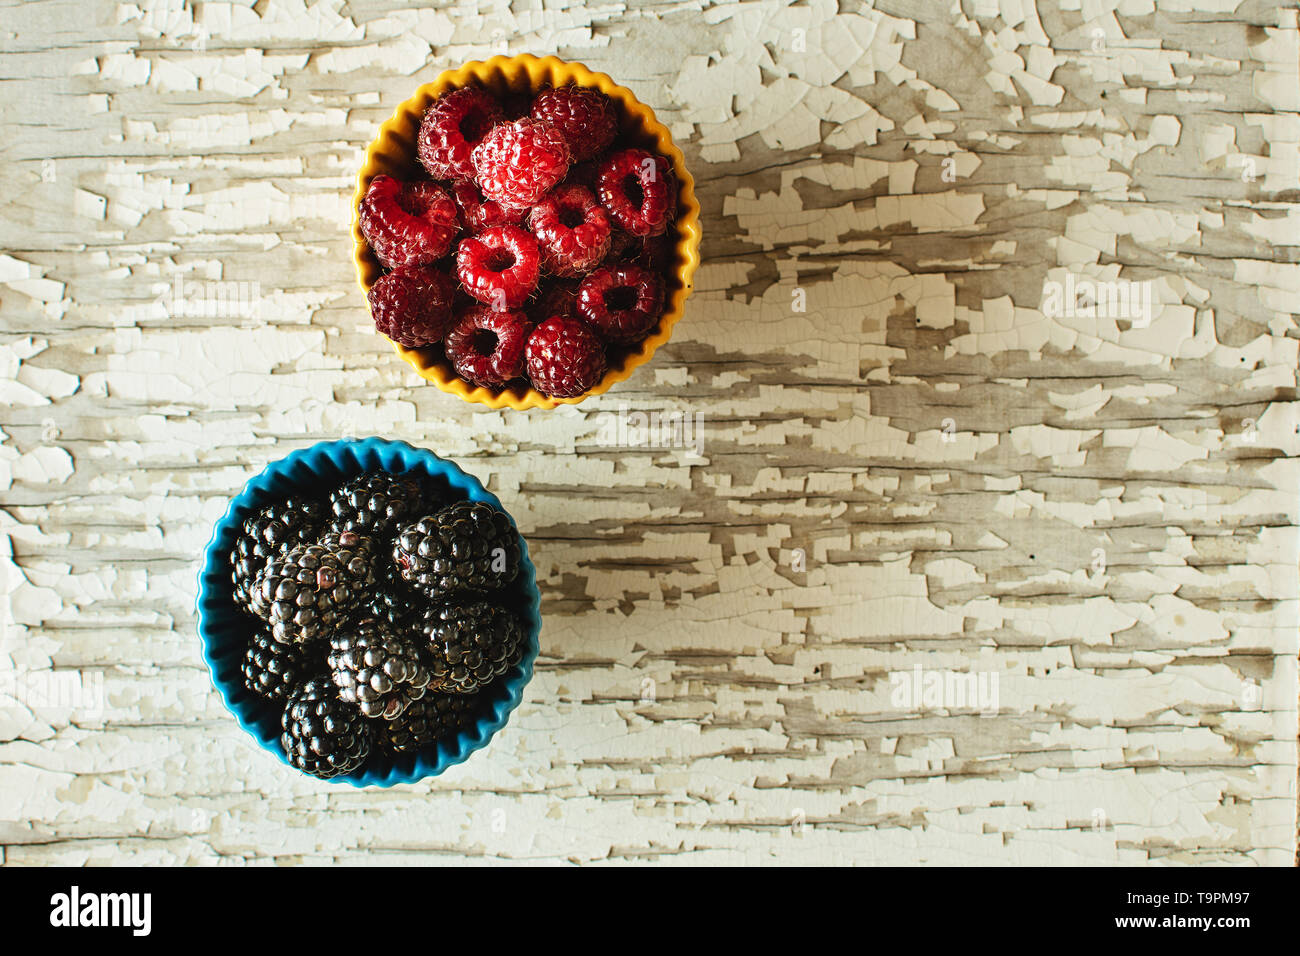 Raspberries and Blackberries in Ceramic Bowls on Rustic Wooden Background Stock Photo